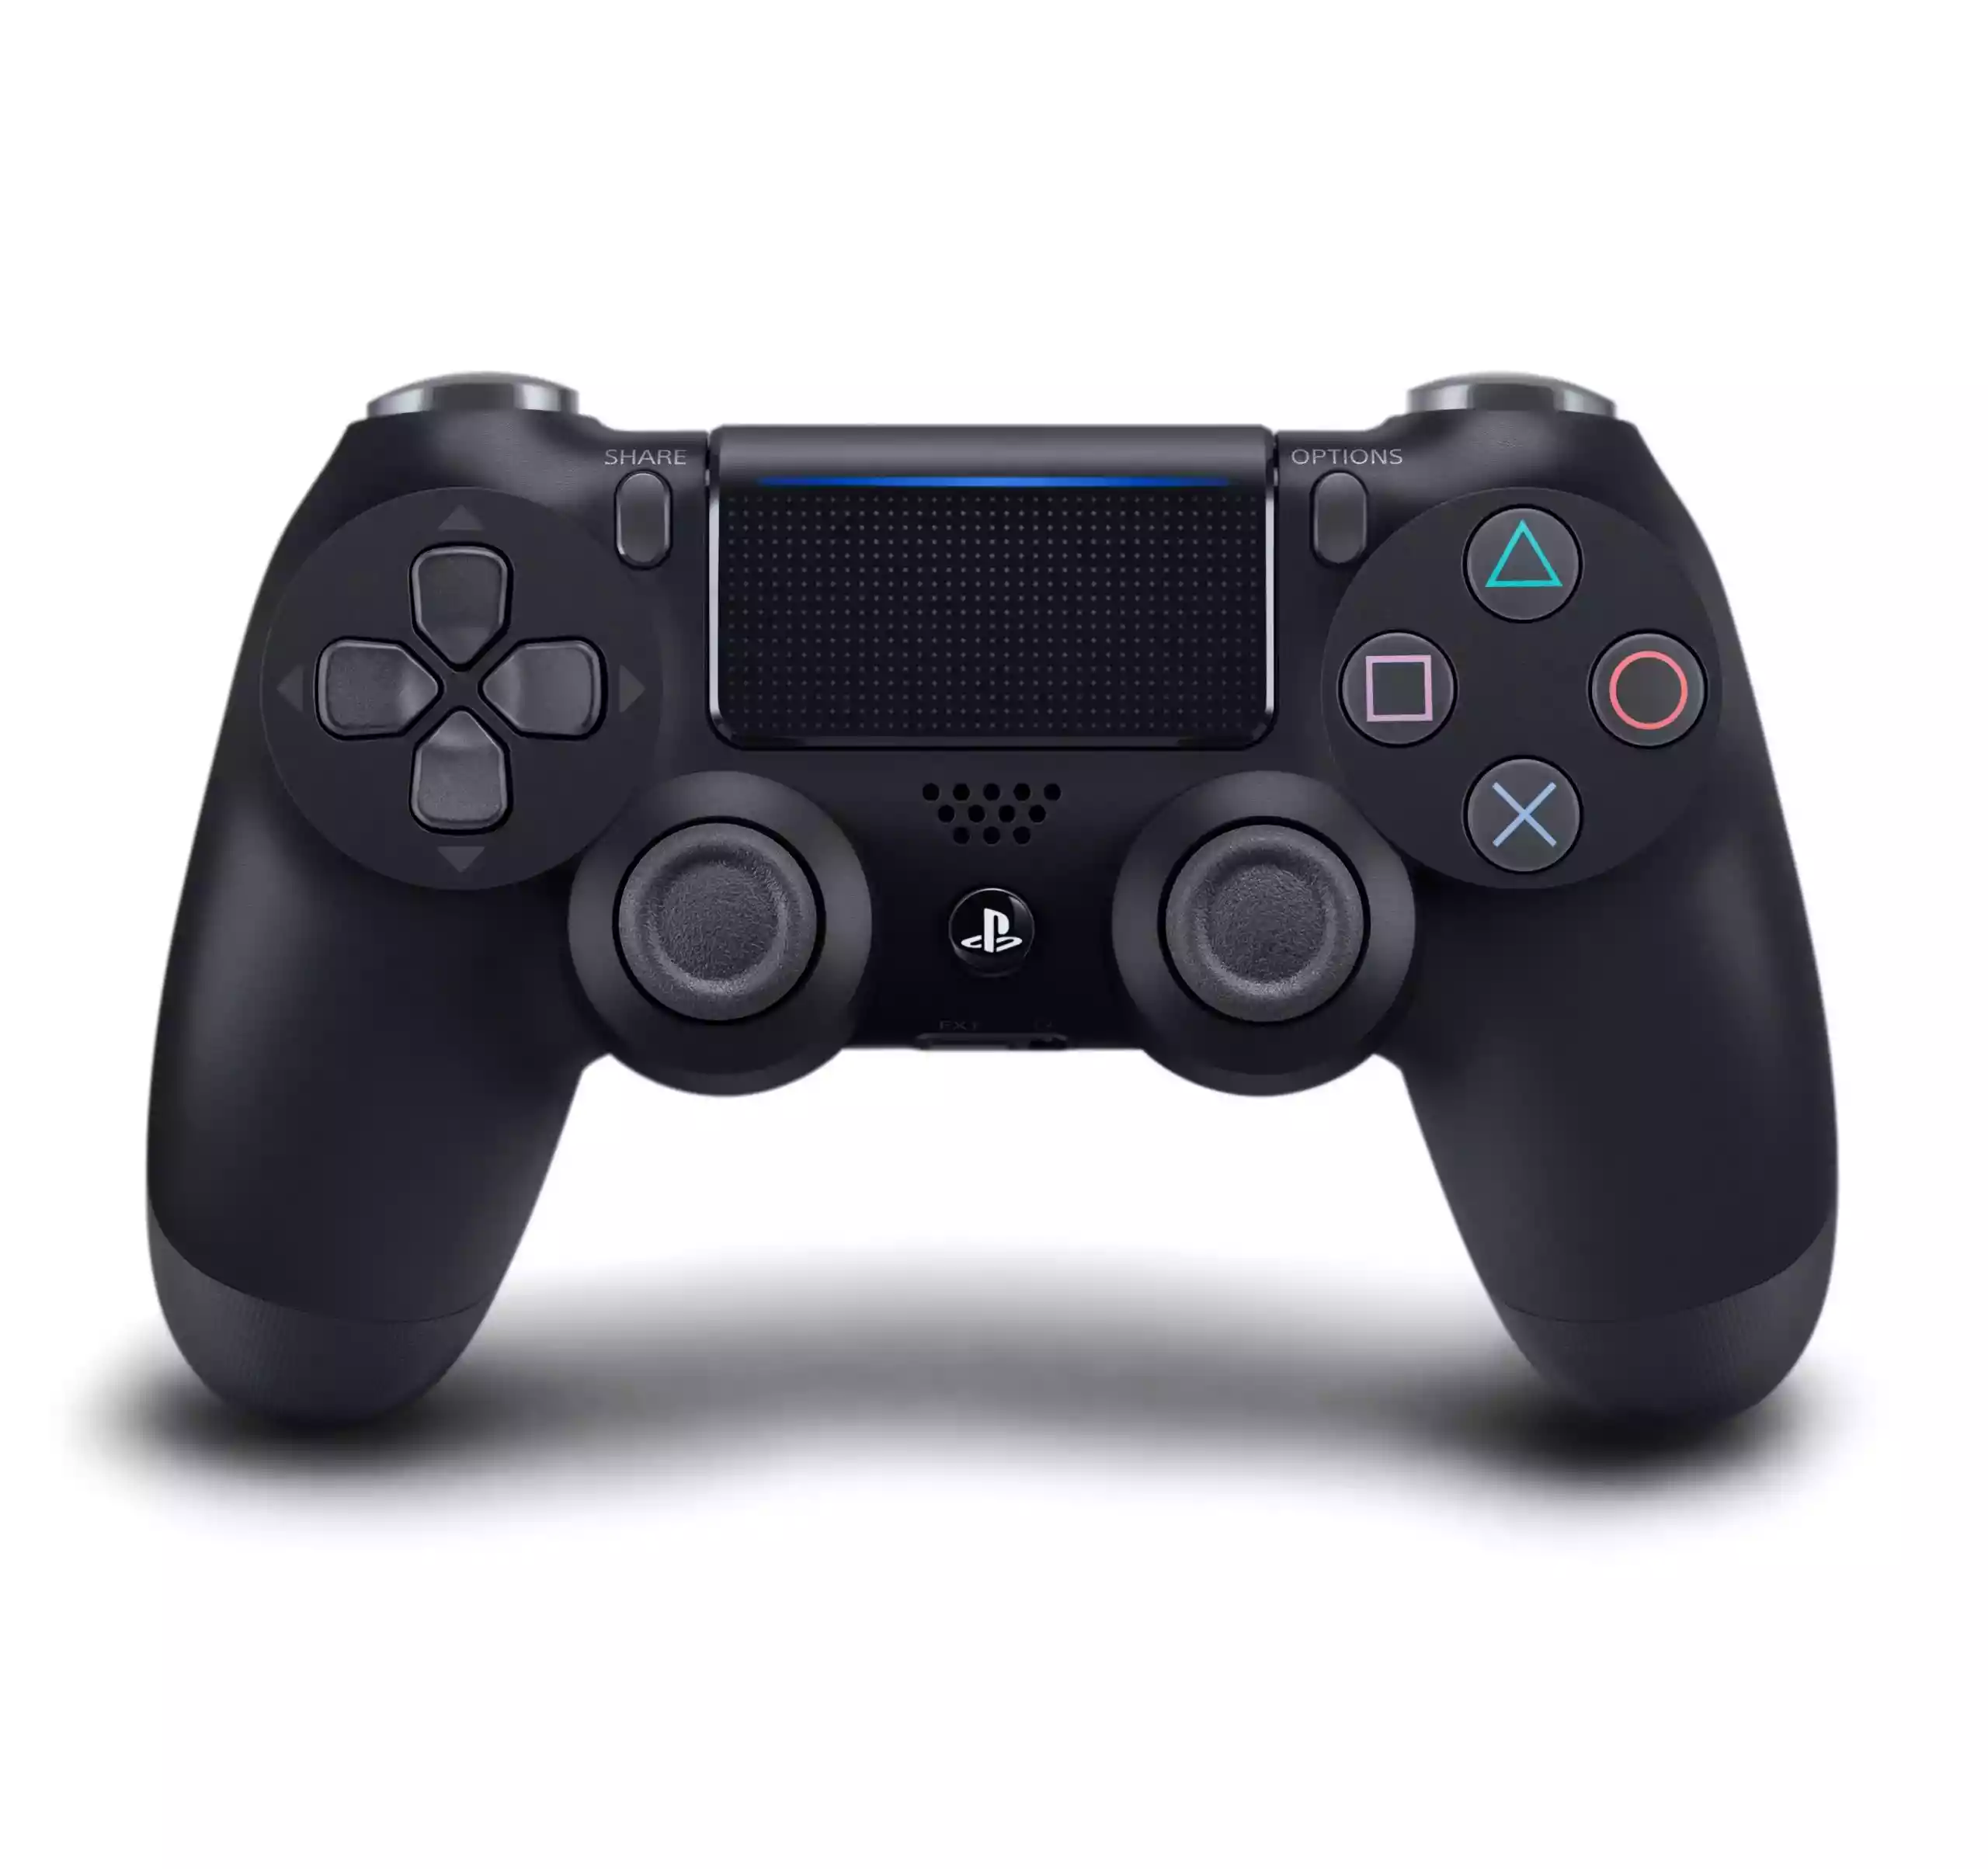 Dualshock 4 Wireless Controller for Playstation 4 PS4 – Black V2 (New)